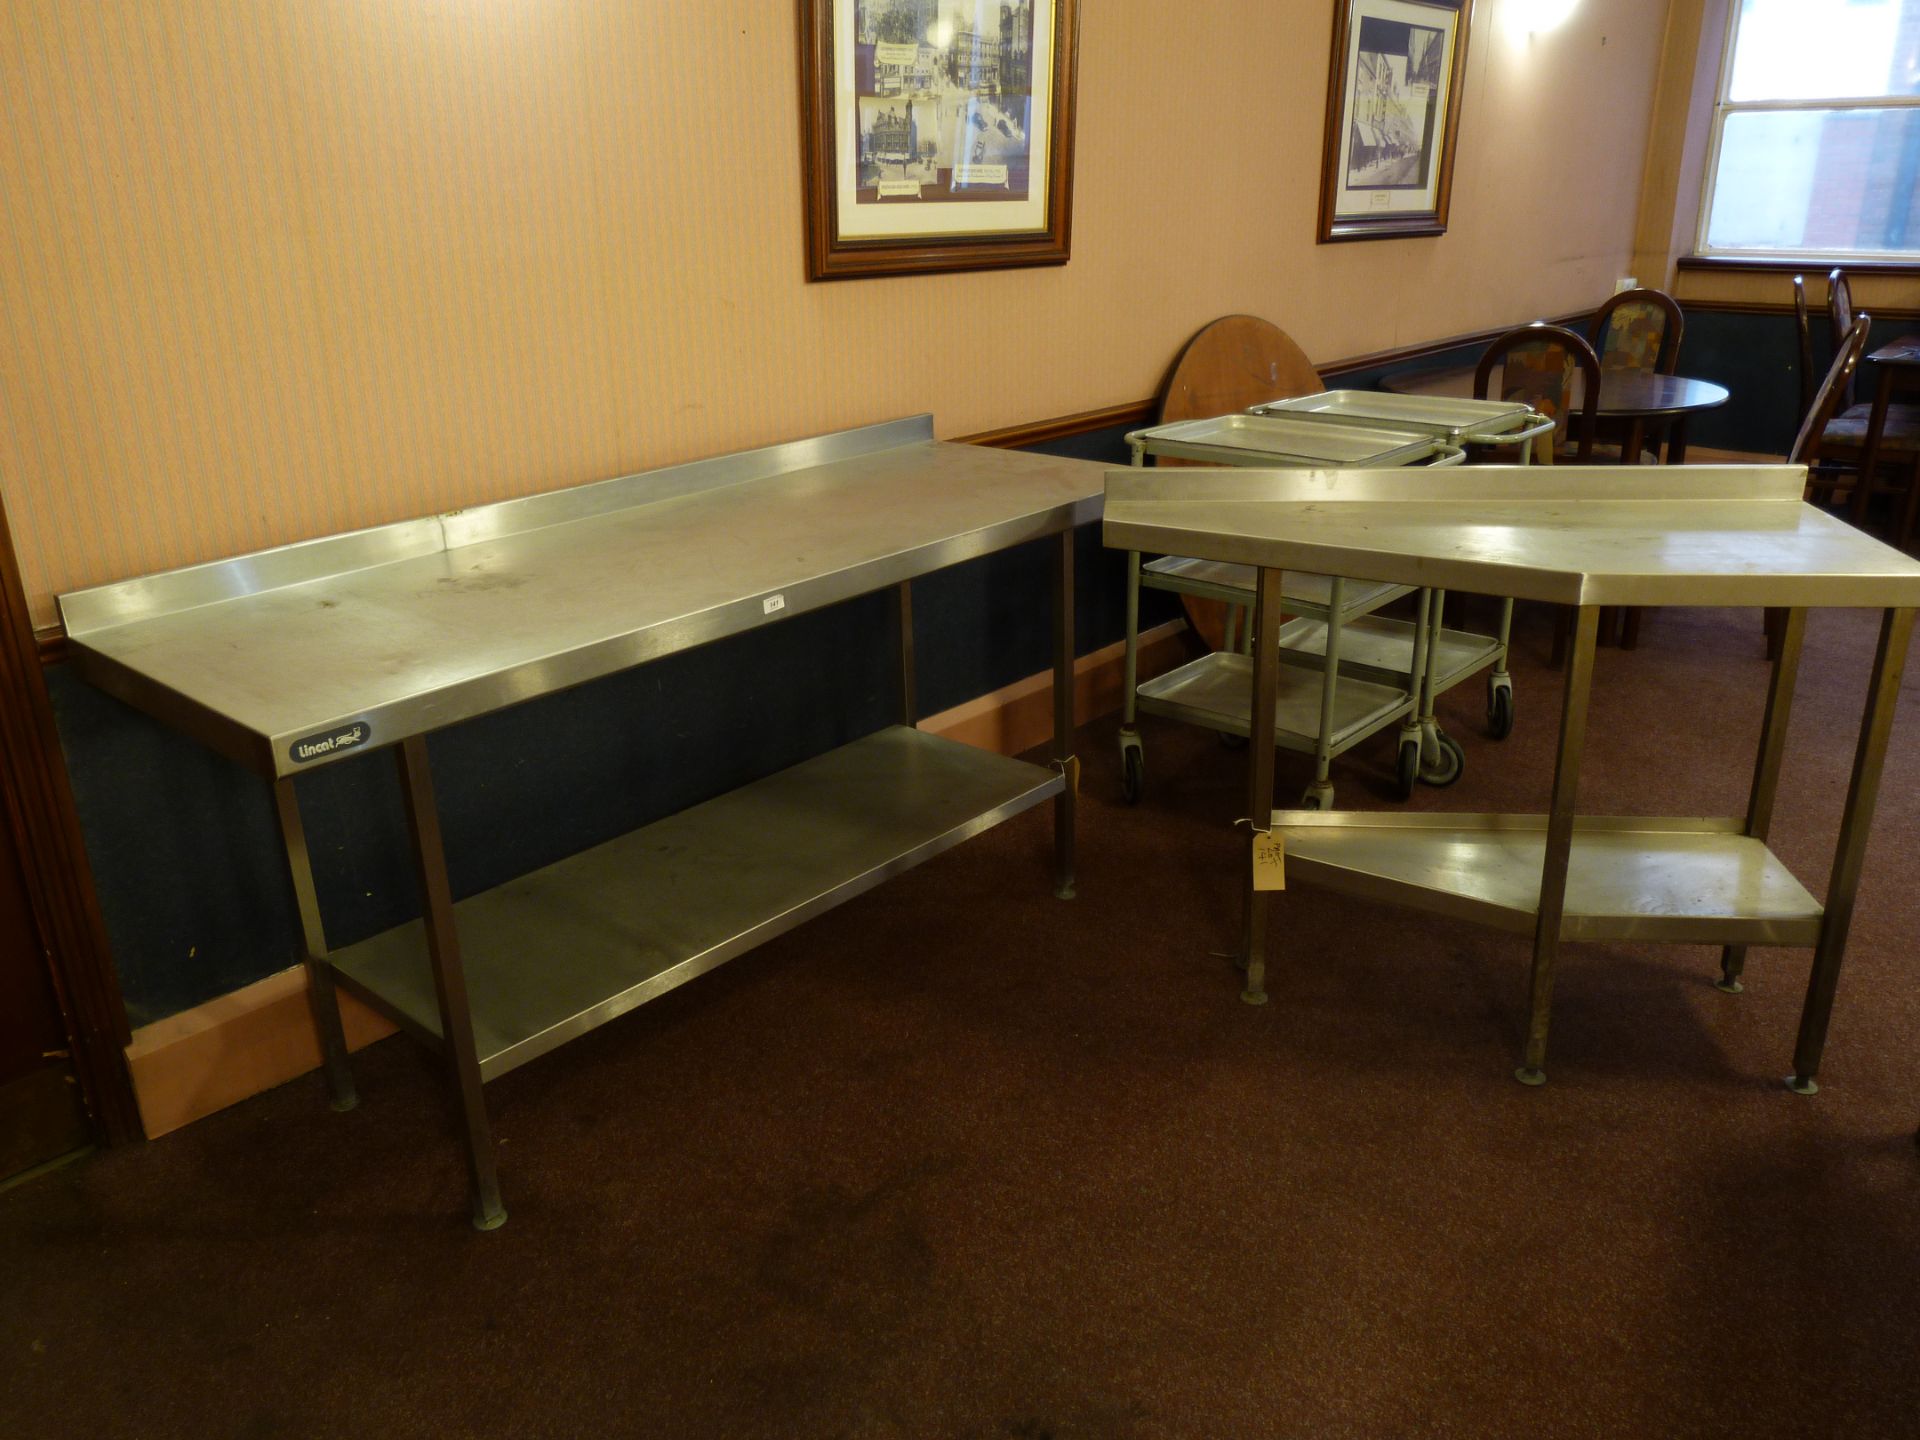 A Lincat stainless steel preparation table 180cm x 65cm and small preparation table 120cm x 50cm